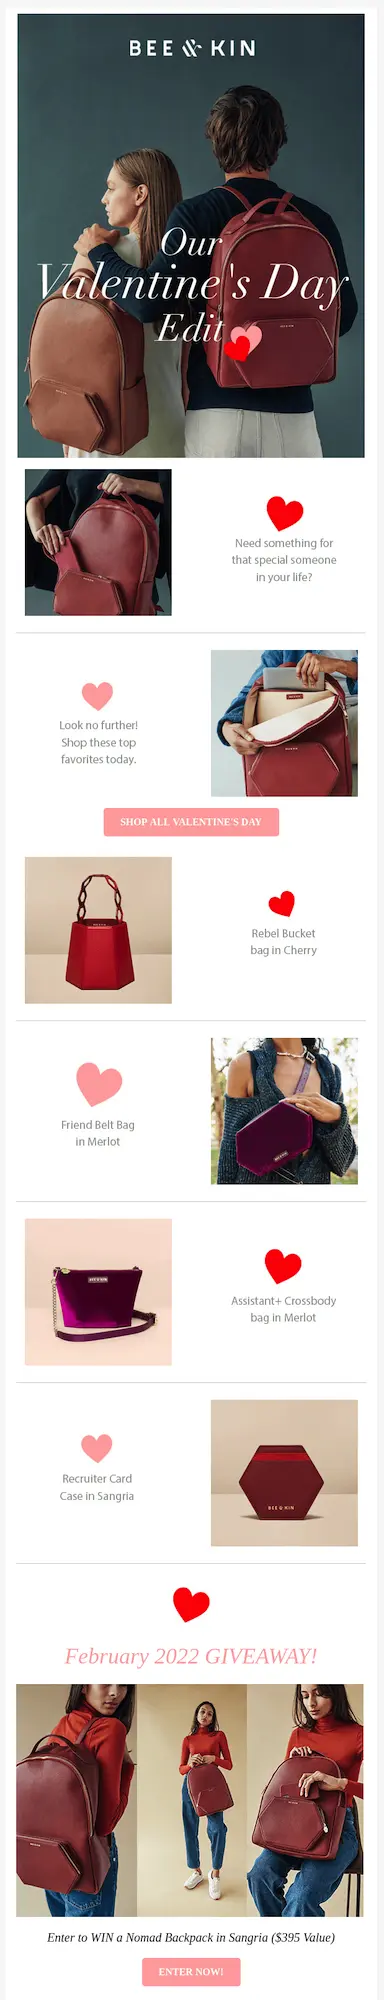 Image shows a Valentine’s Day email campaign from bag brand BEE & KIN, featuring the brand’s logo and the headline “Our Valentine’s Day Edit” in white over a photo of two models with their backs turned to the camera, wearing backpacks in two different shades of red against a dark turquoise background. The email continues with several product shots of other red-colored bags and ends with a section called “February 2022 GIVEAWAY!” This bottom section features 3 photos of a model showing off the brand’s Nomad Backpack in Sangria, a $395 value, from various angles. The CTA at the end reads, “ENTER NOW!”